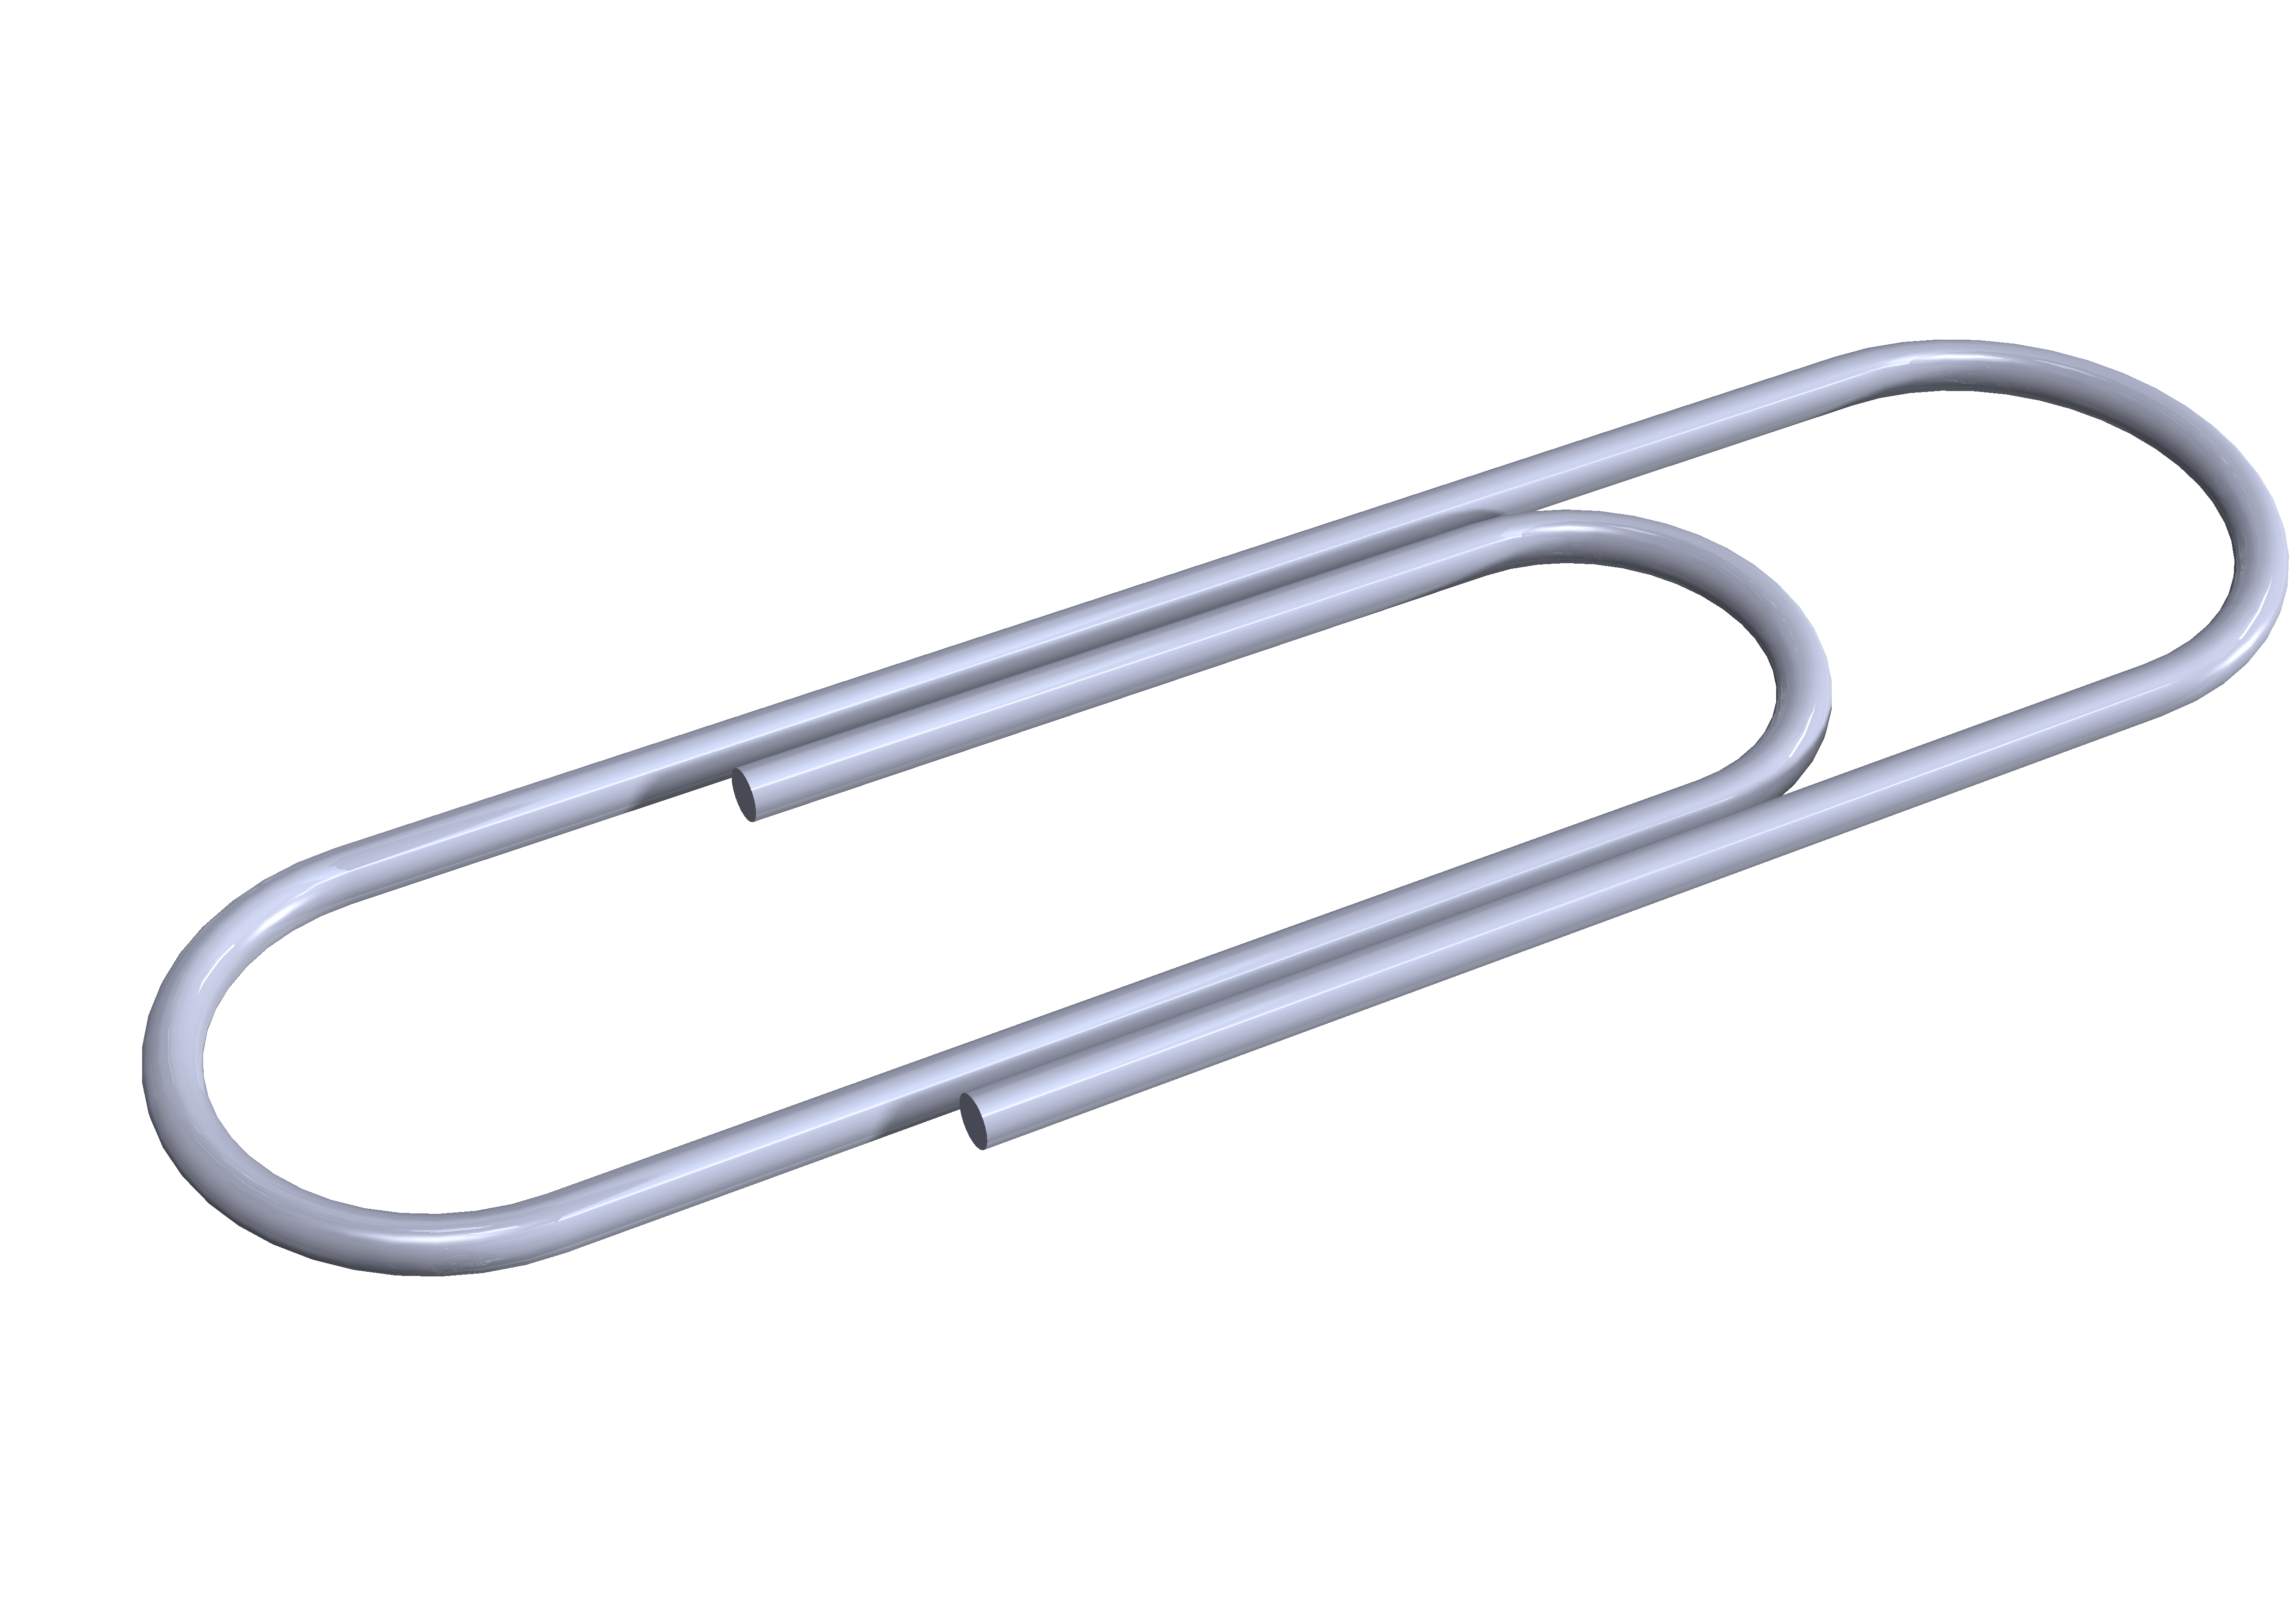 How to Model a Paperclip in SolidWorks? | LearnSOLIDWORKS.com